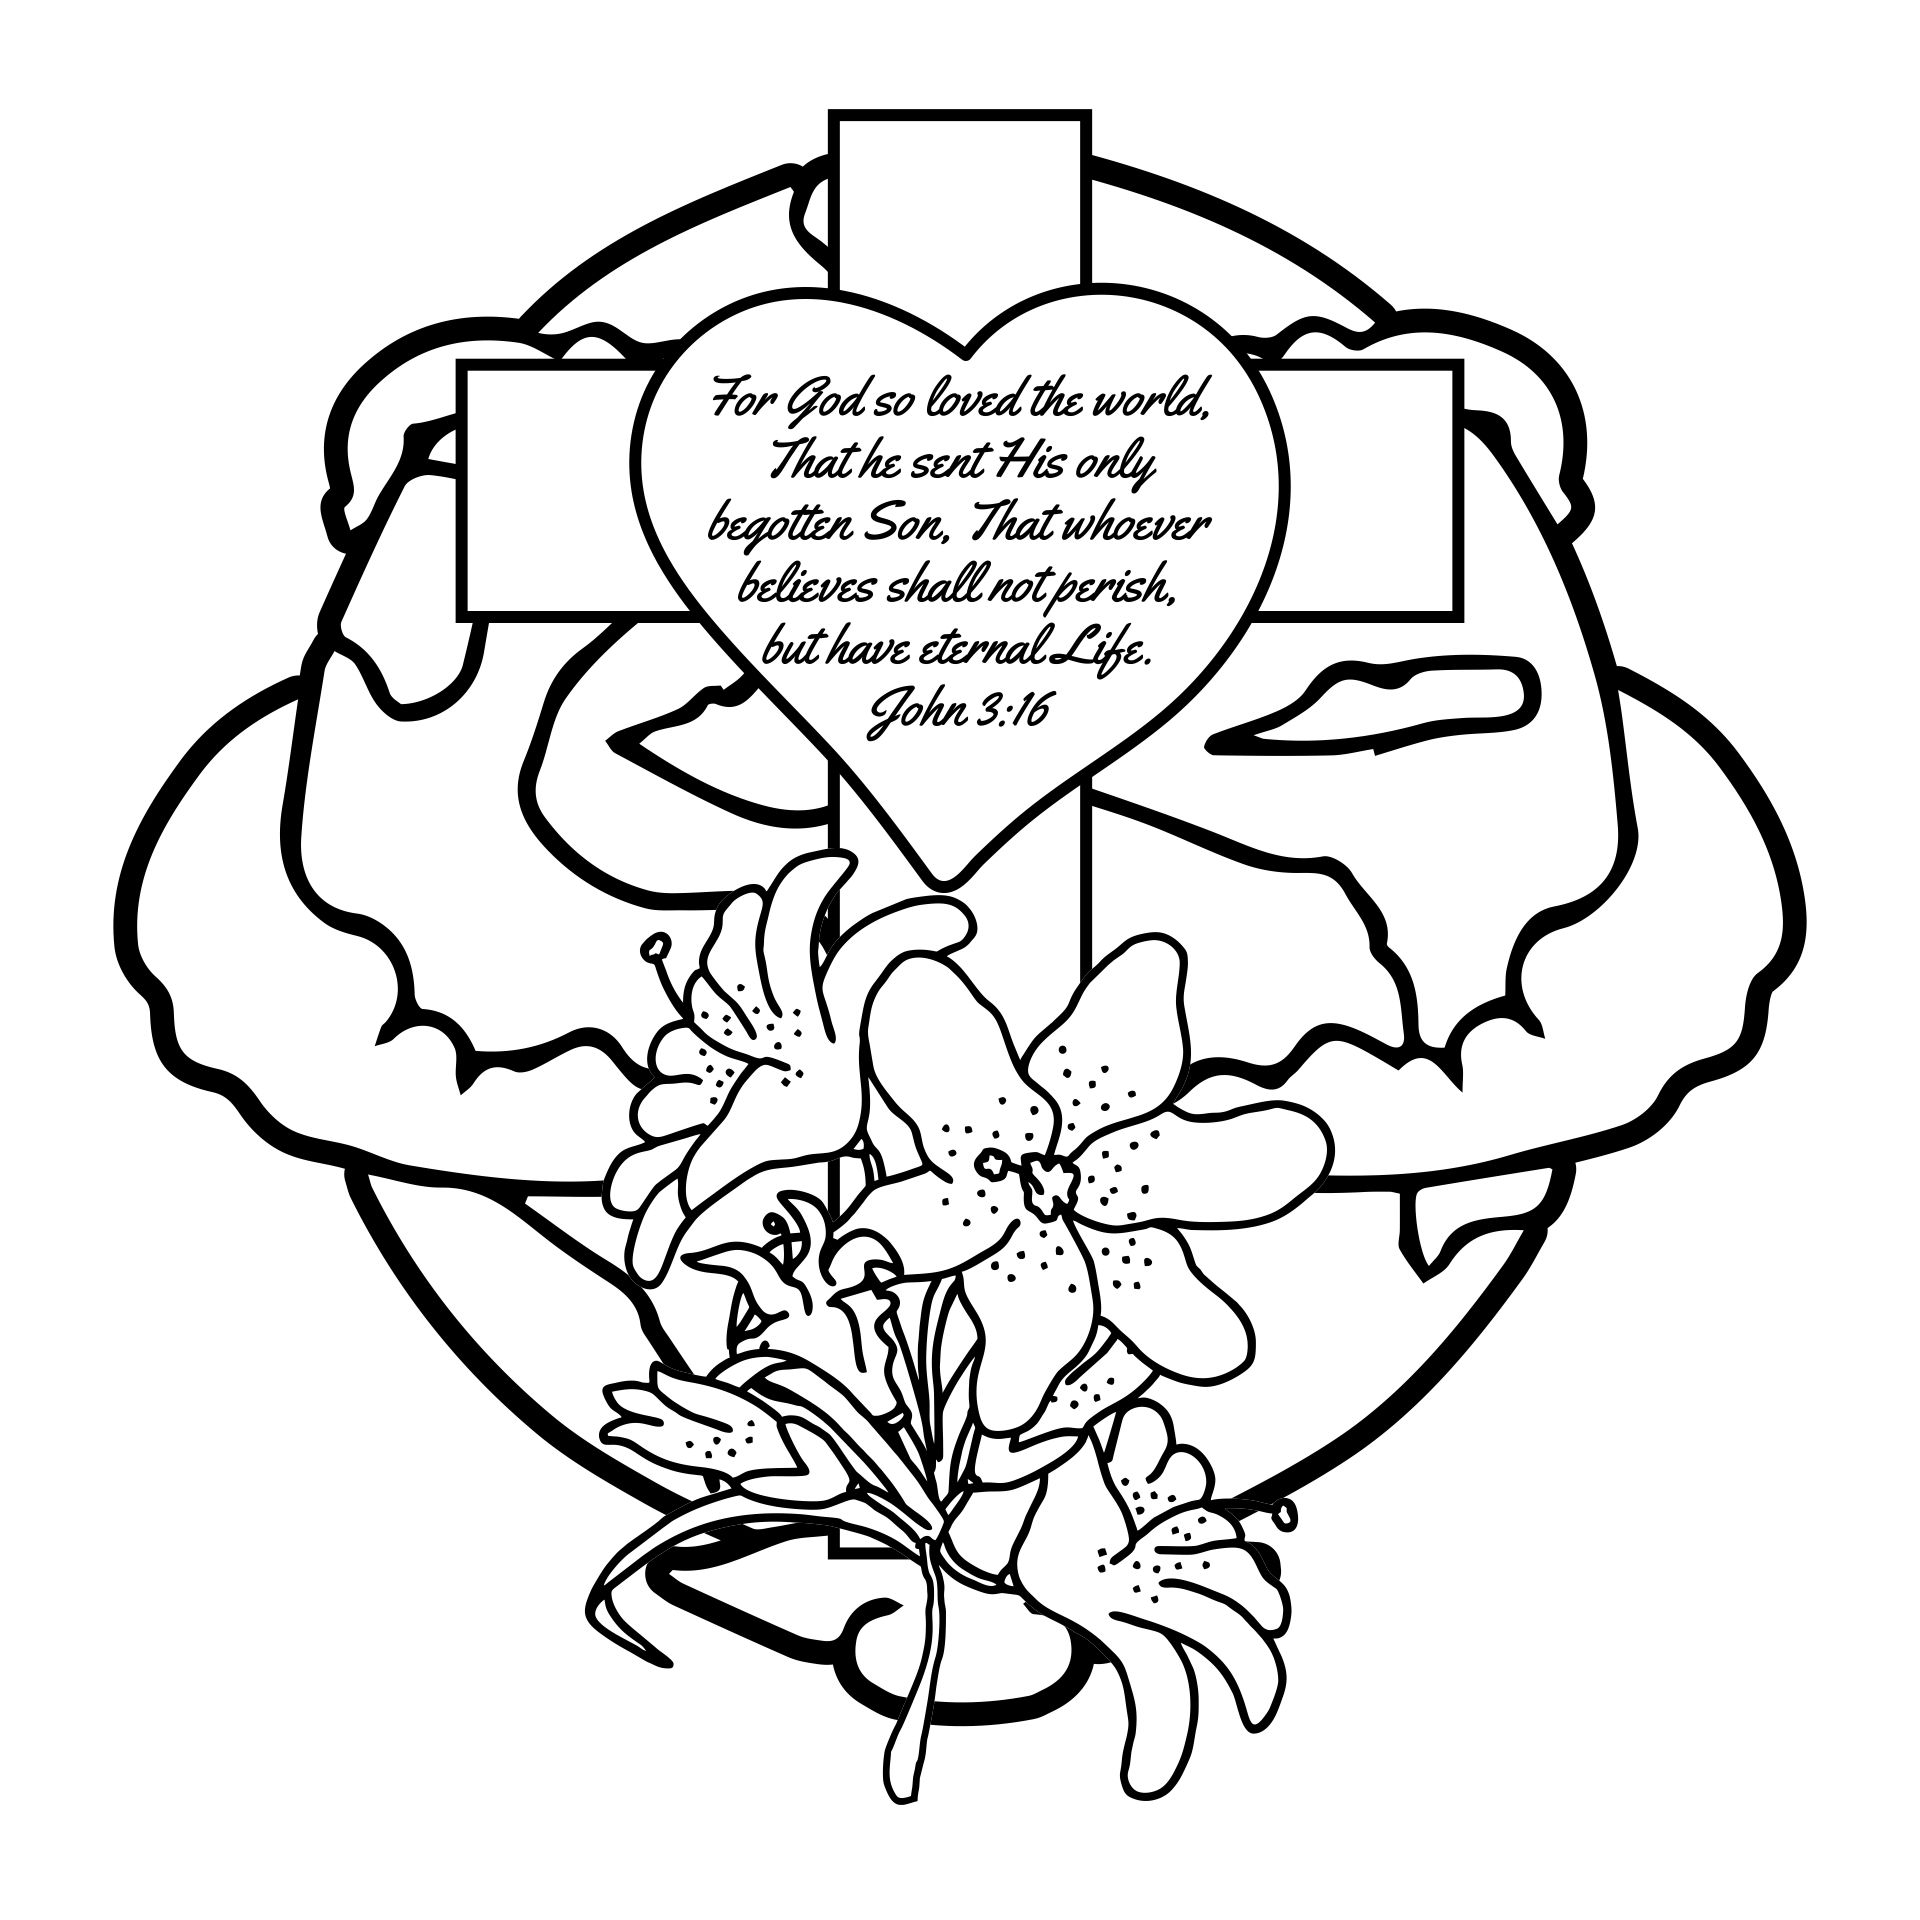 8 Best Images of Printable Coloring Page With John 3 16 - John 3 16